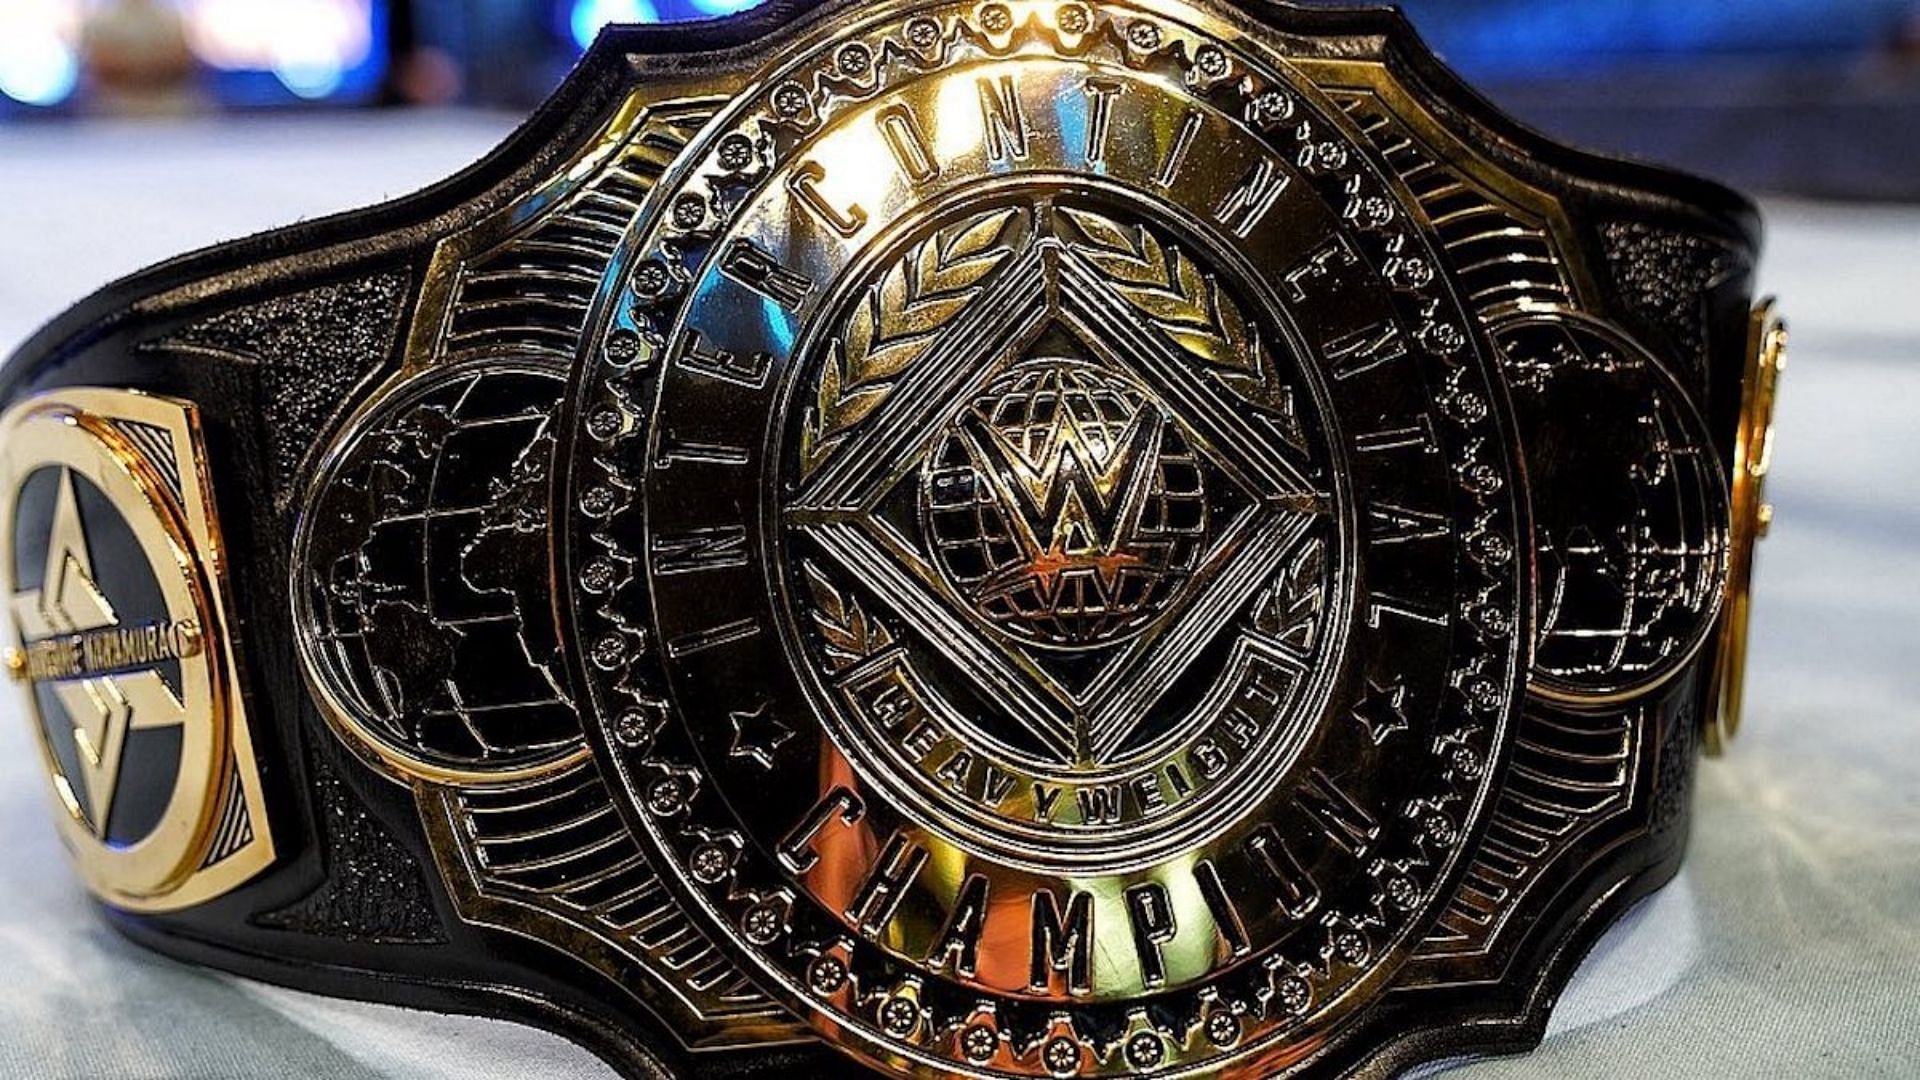 The prestigious WWE Intercontinental Championship is currently held by Gunther.